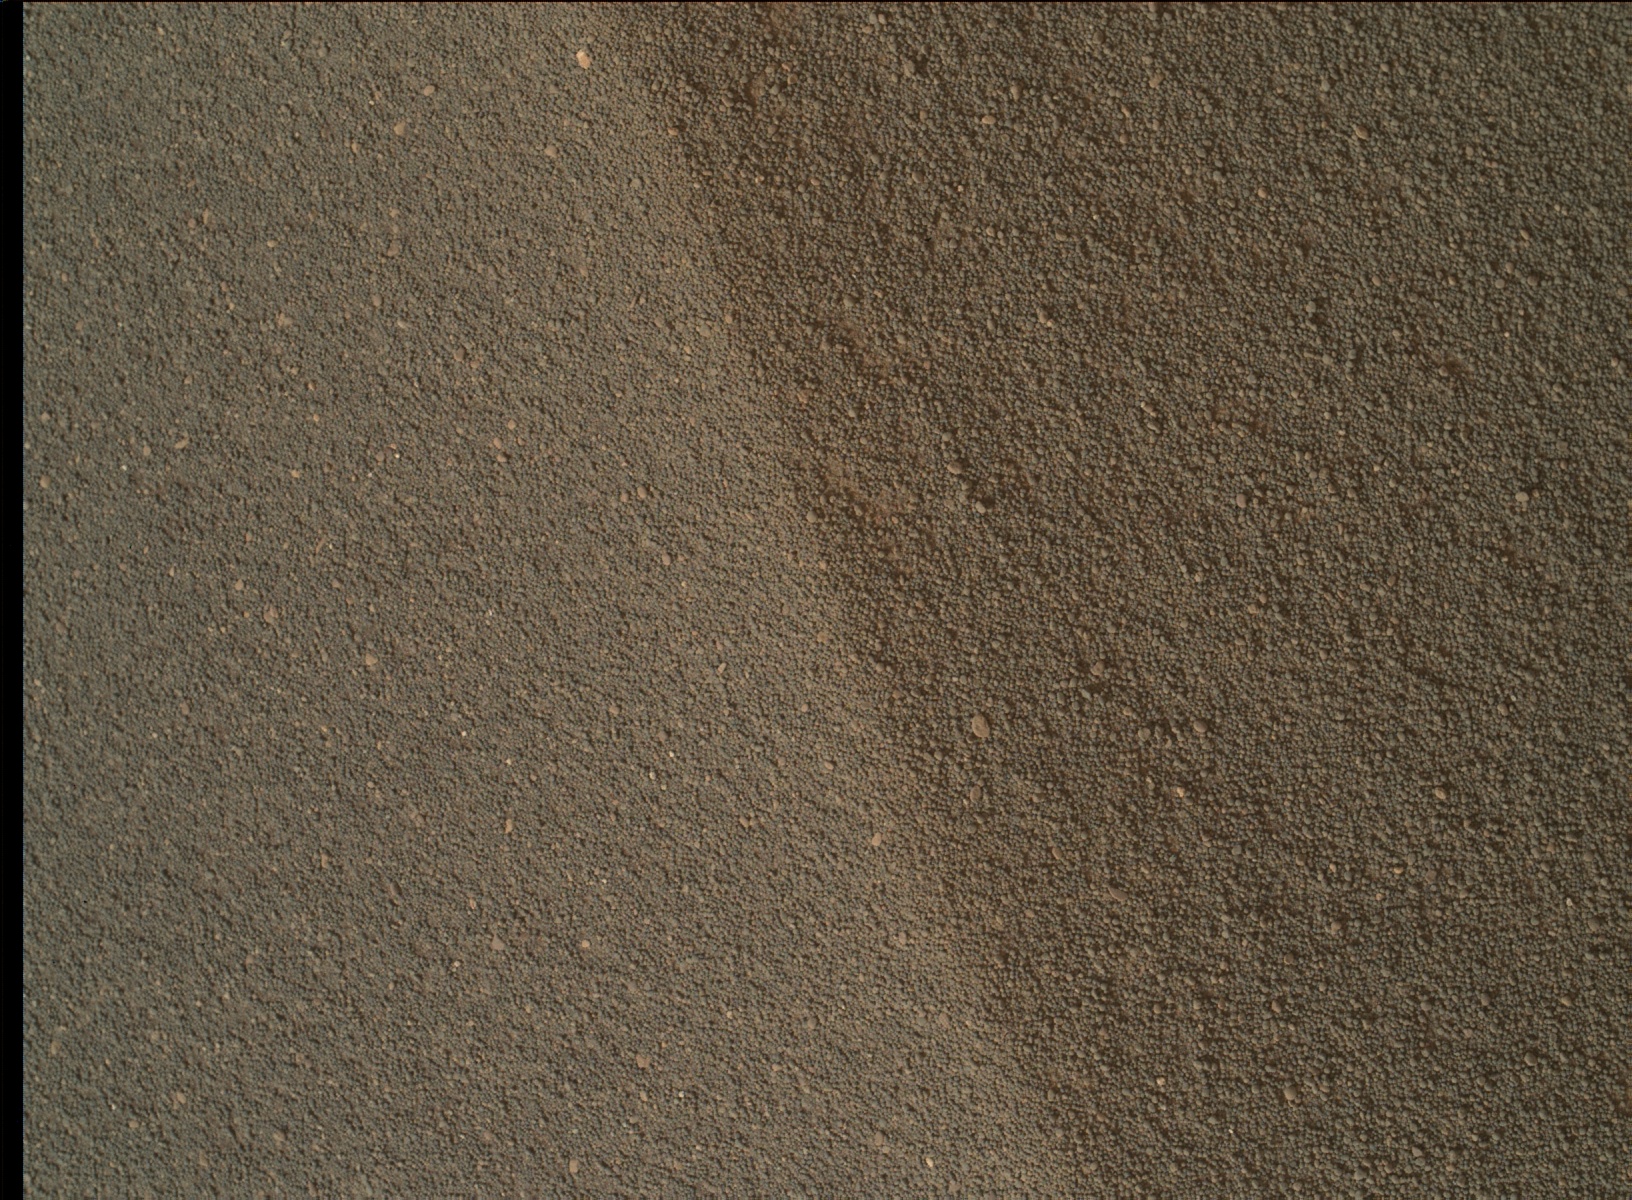 Nasa's Mars rover Curiosity acquired this image using its Mars Hand Lens Imager (MAHLI) on Sol 1687